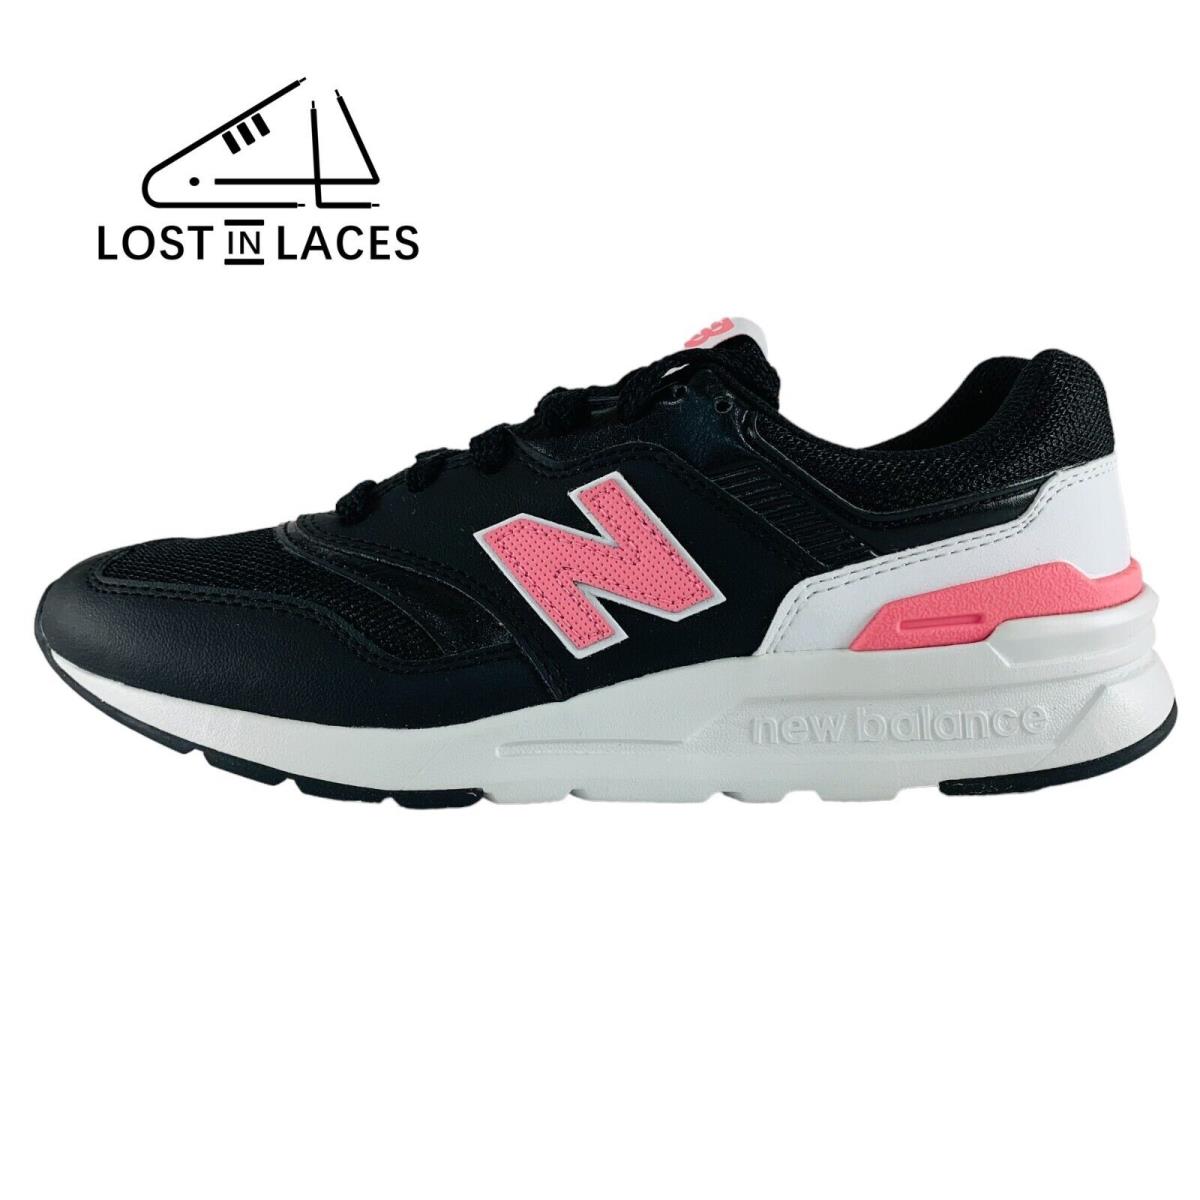 New Balance 997H Black White Pink Sneakers New Shoes CW997HCY Women`s Sizes